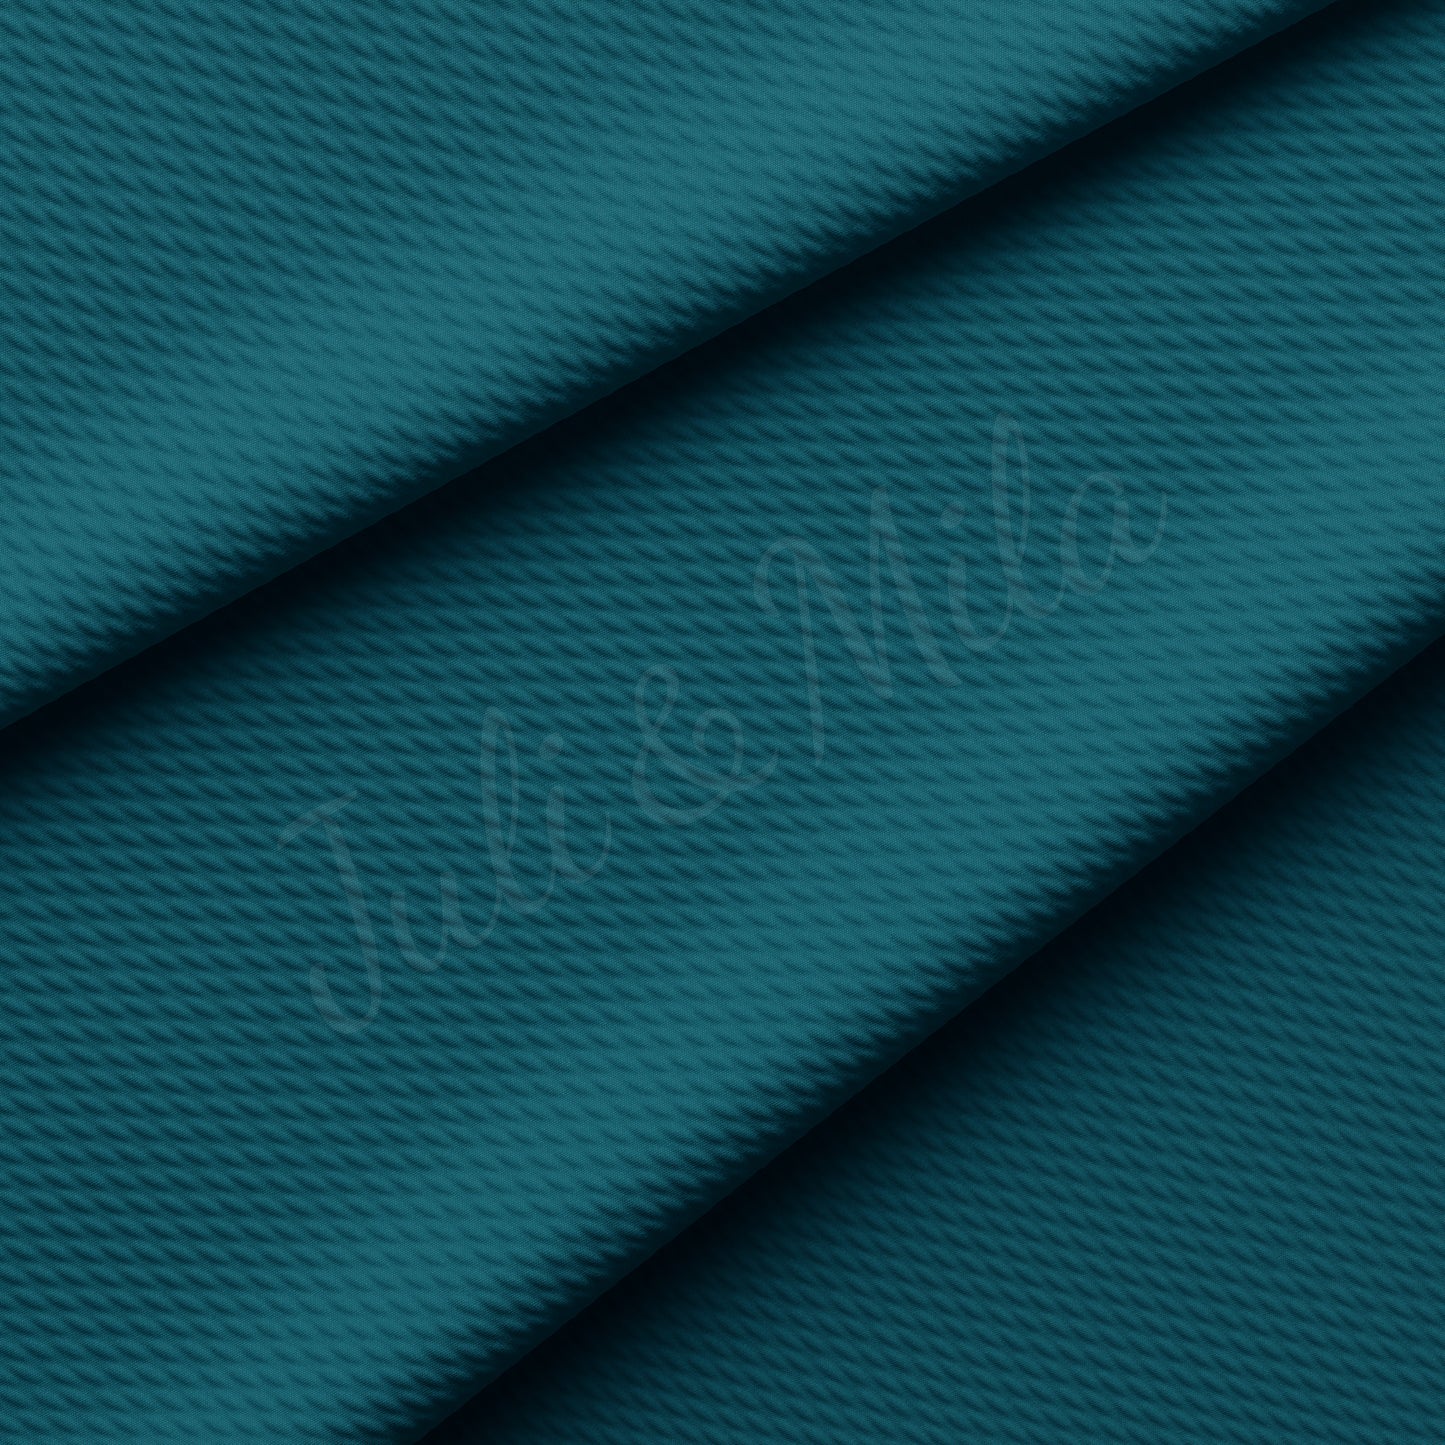 Peacock Liverpool Bullet Textured Fabric